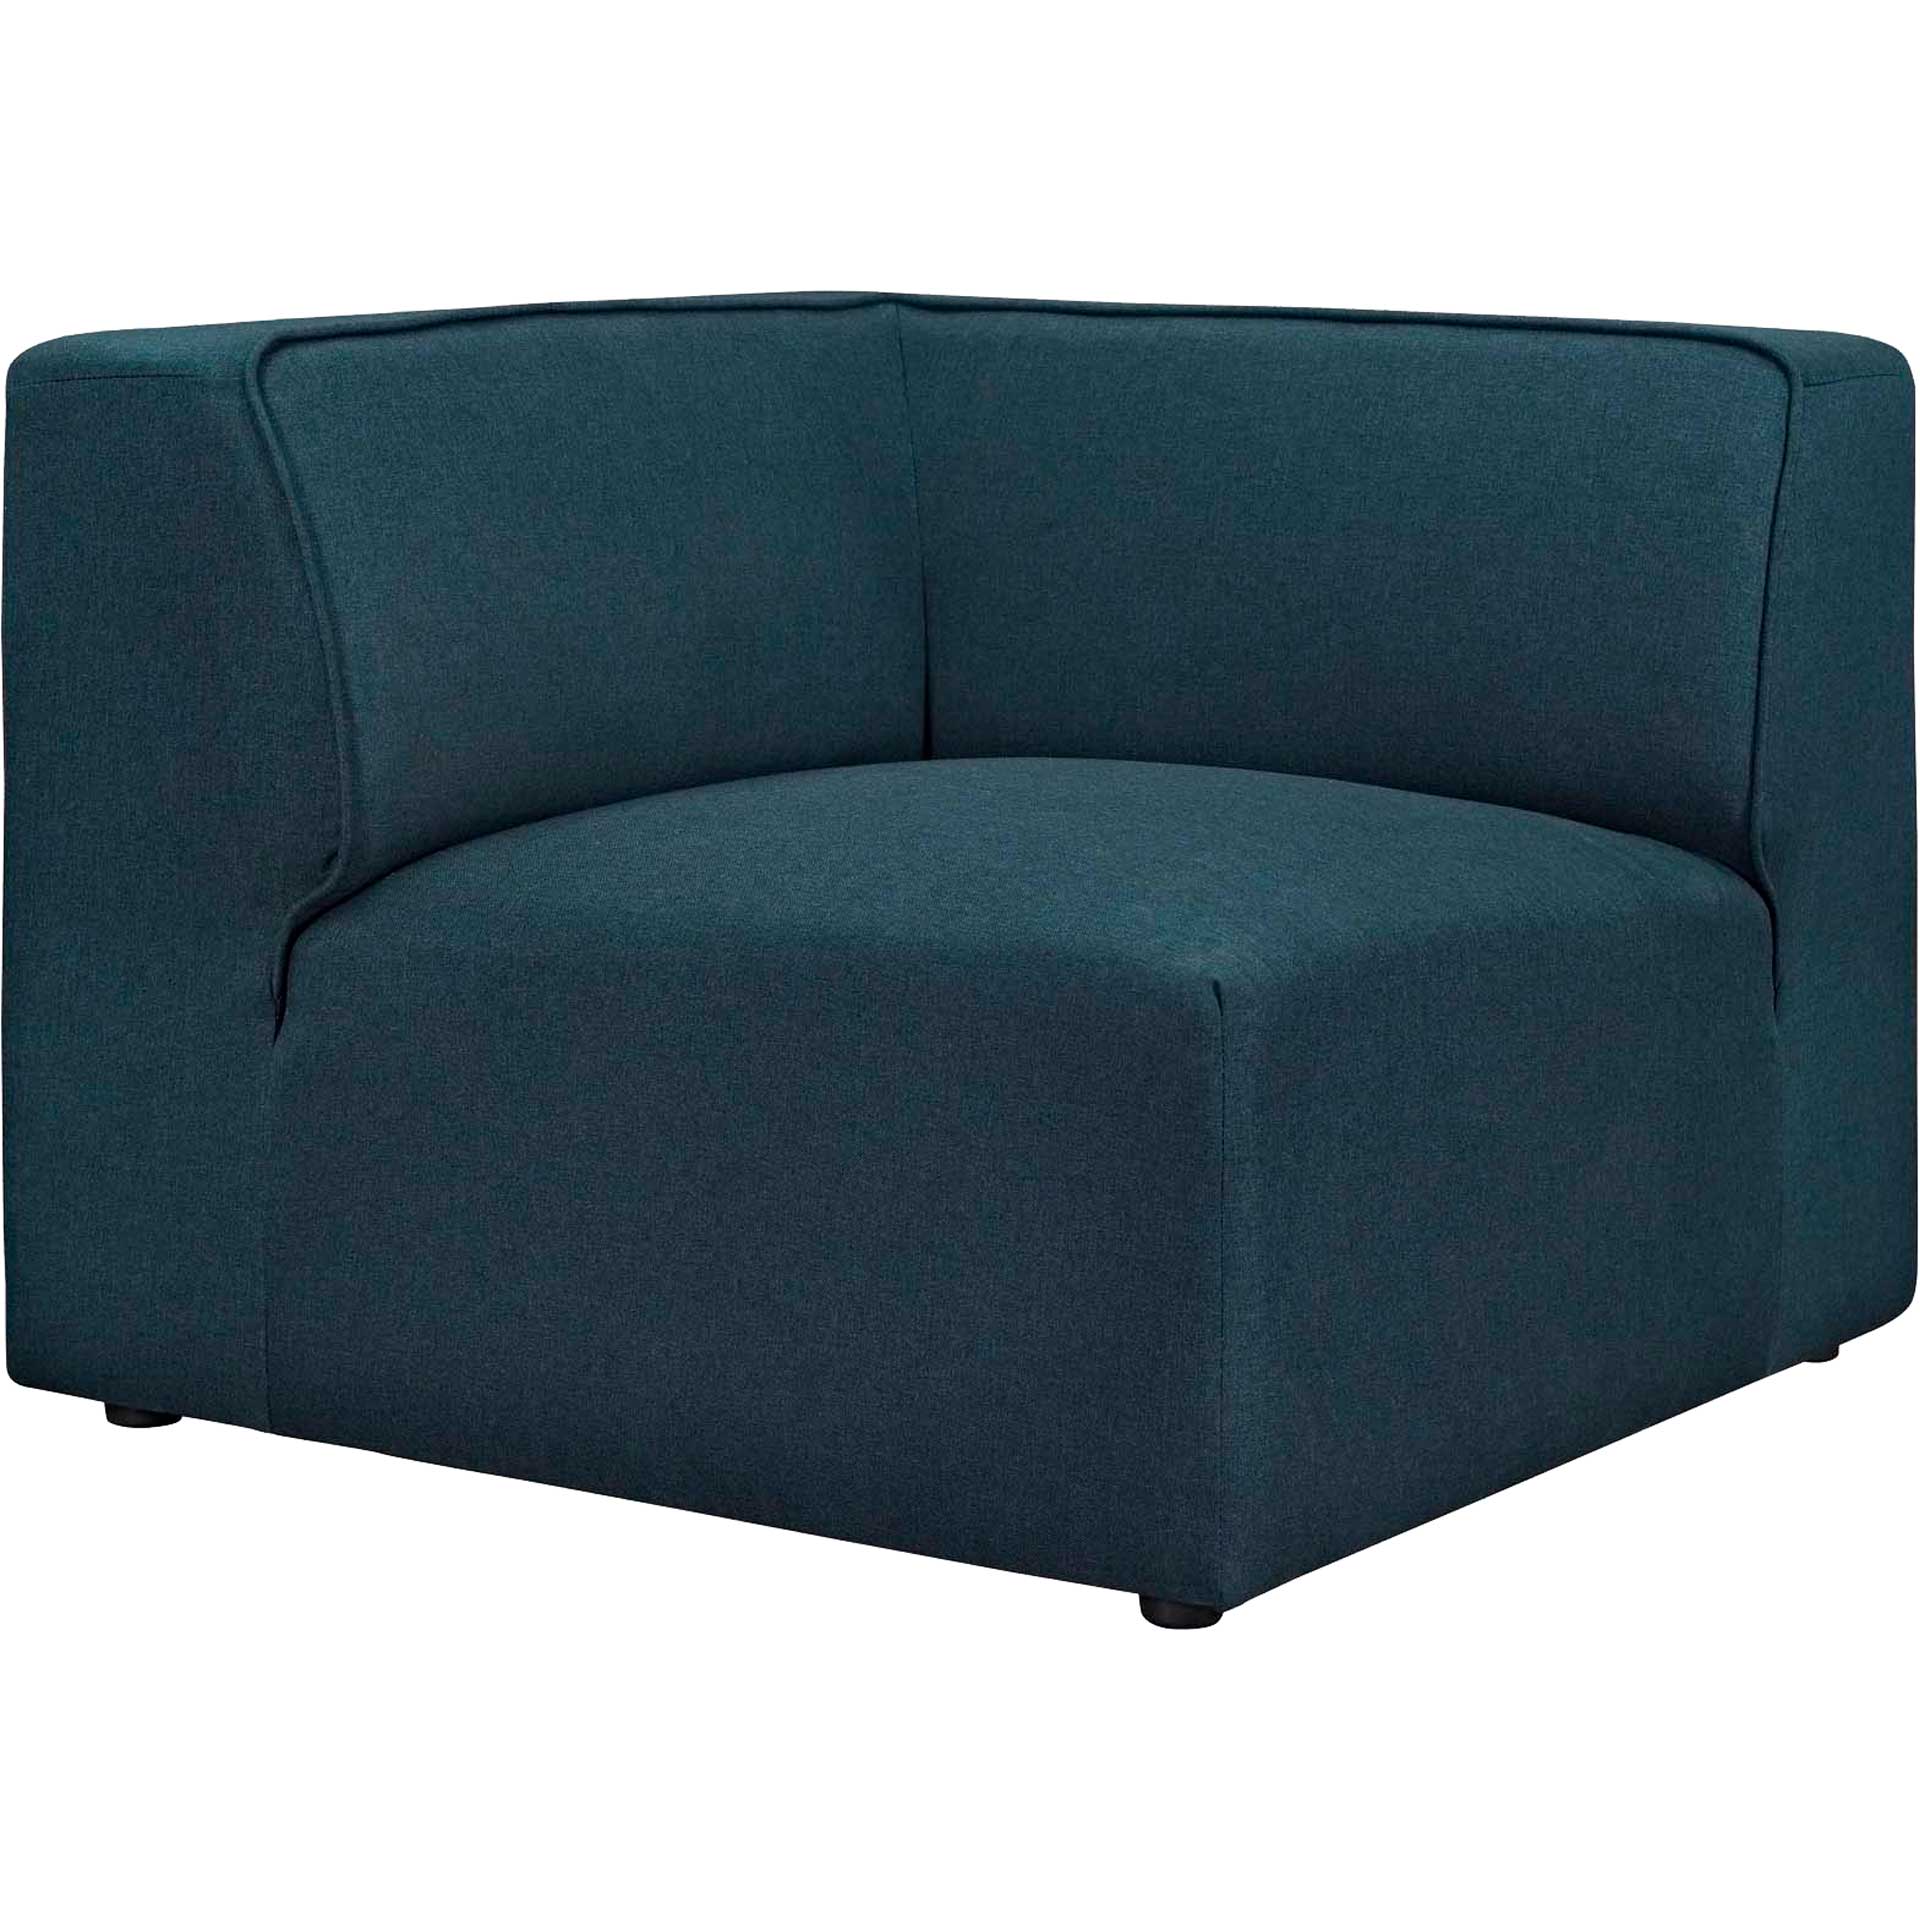 Maisie 7 Piece L-Shaped Armless Sectional Sofa Blue